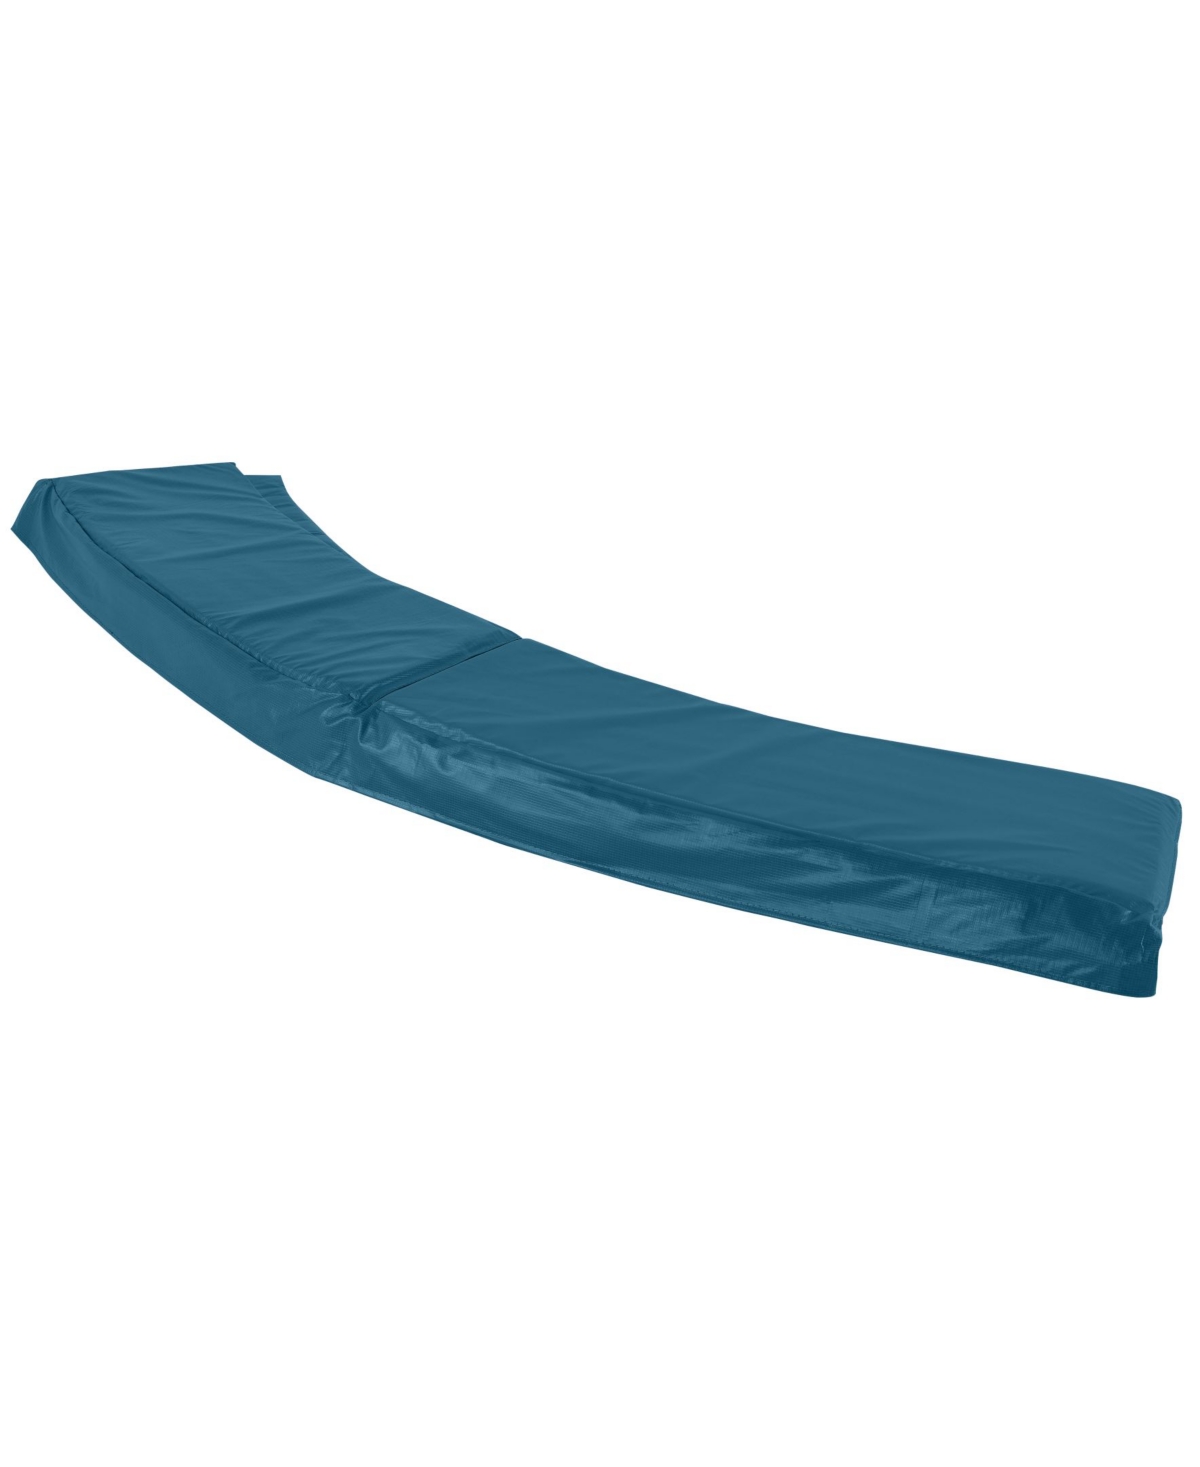 Upperbounce Super Trampoline Replacement Safety Pad Fits For 7.5' Round Frames - Aqua In Blue